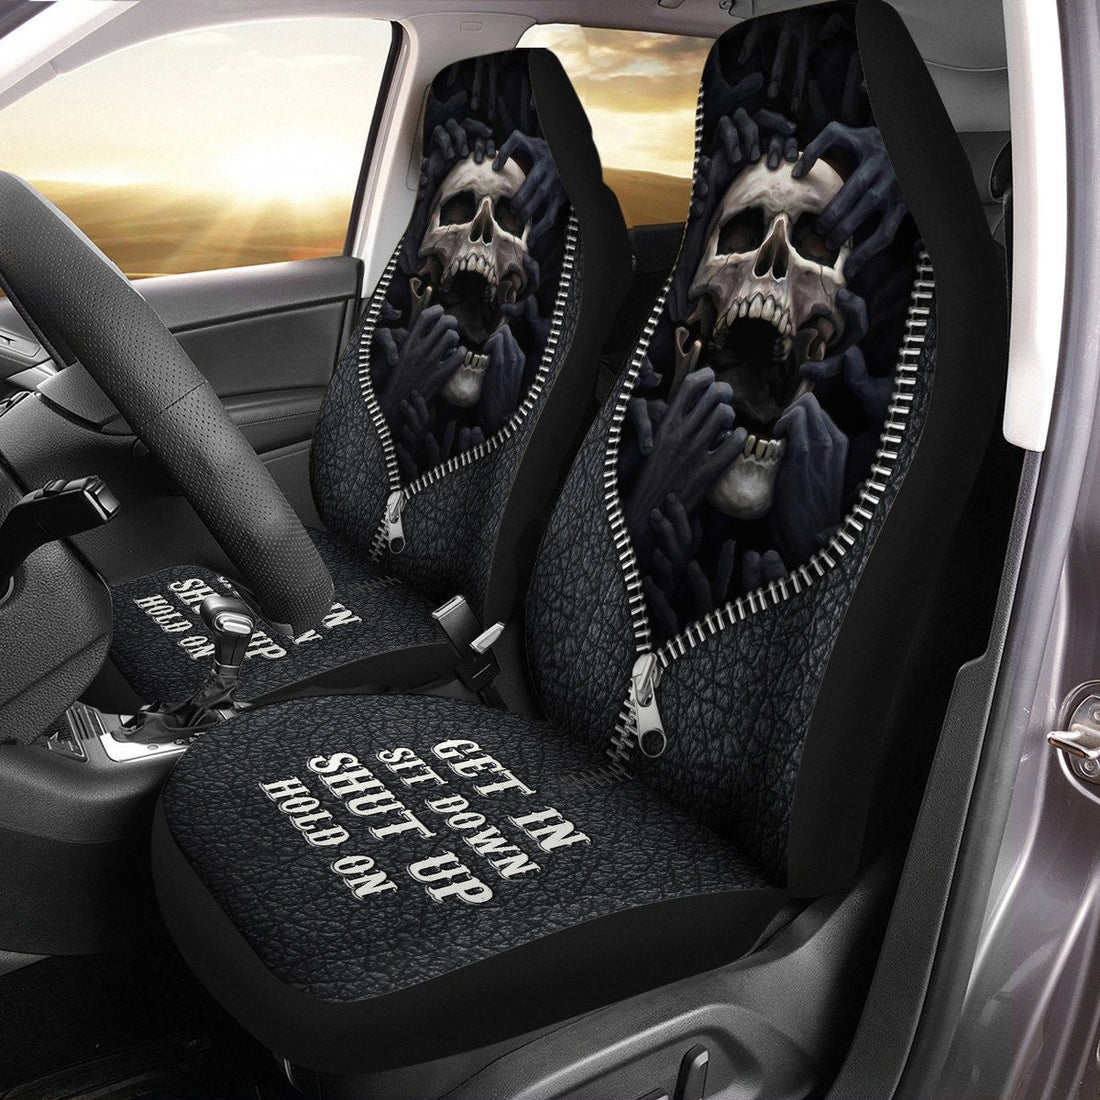 Skull Darkness Hold on Car Seat Covers Universal Fit Set 2